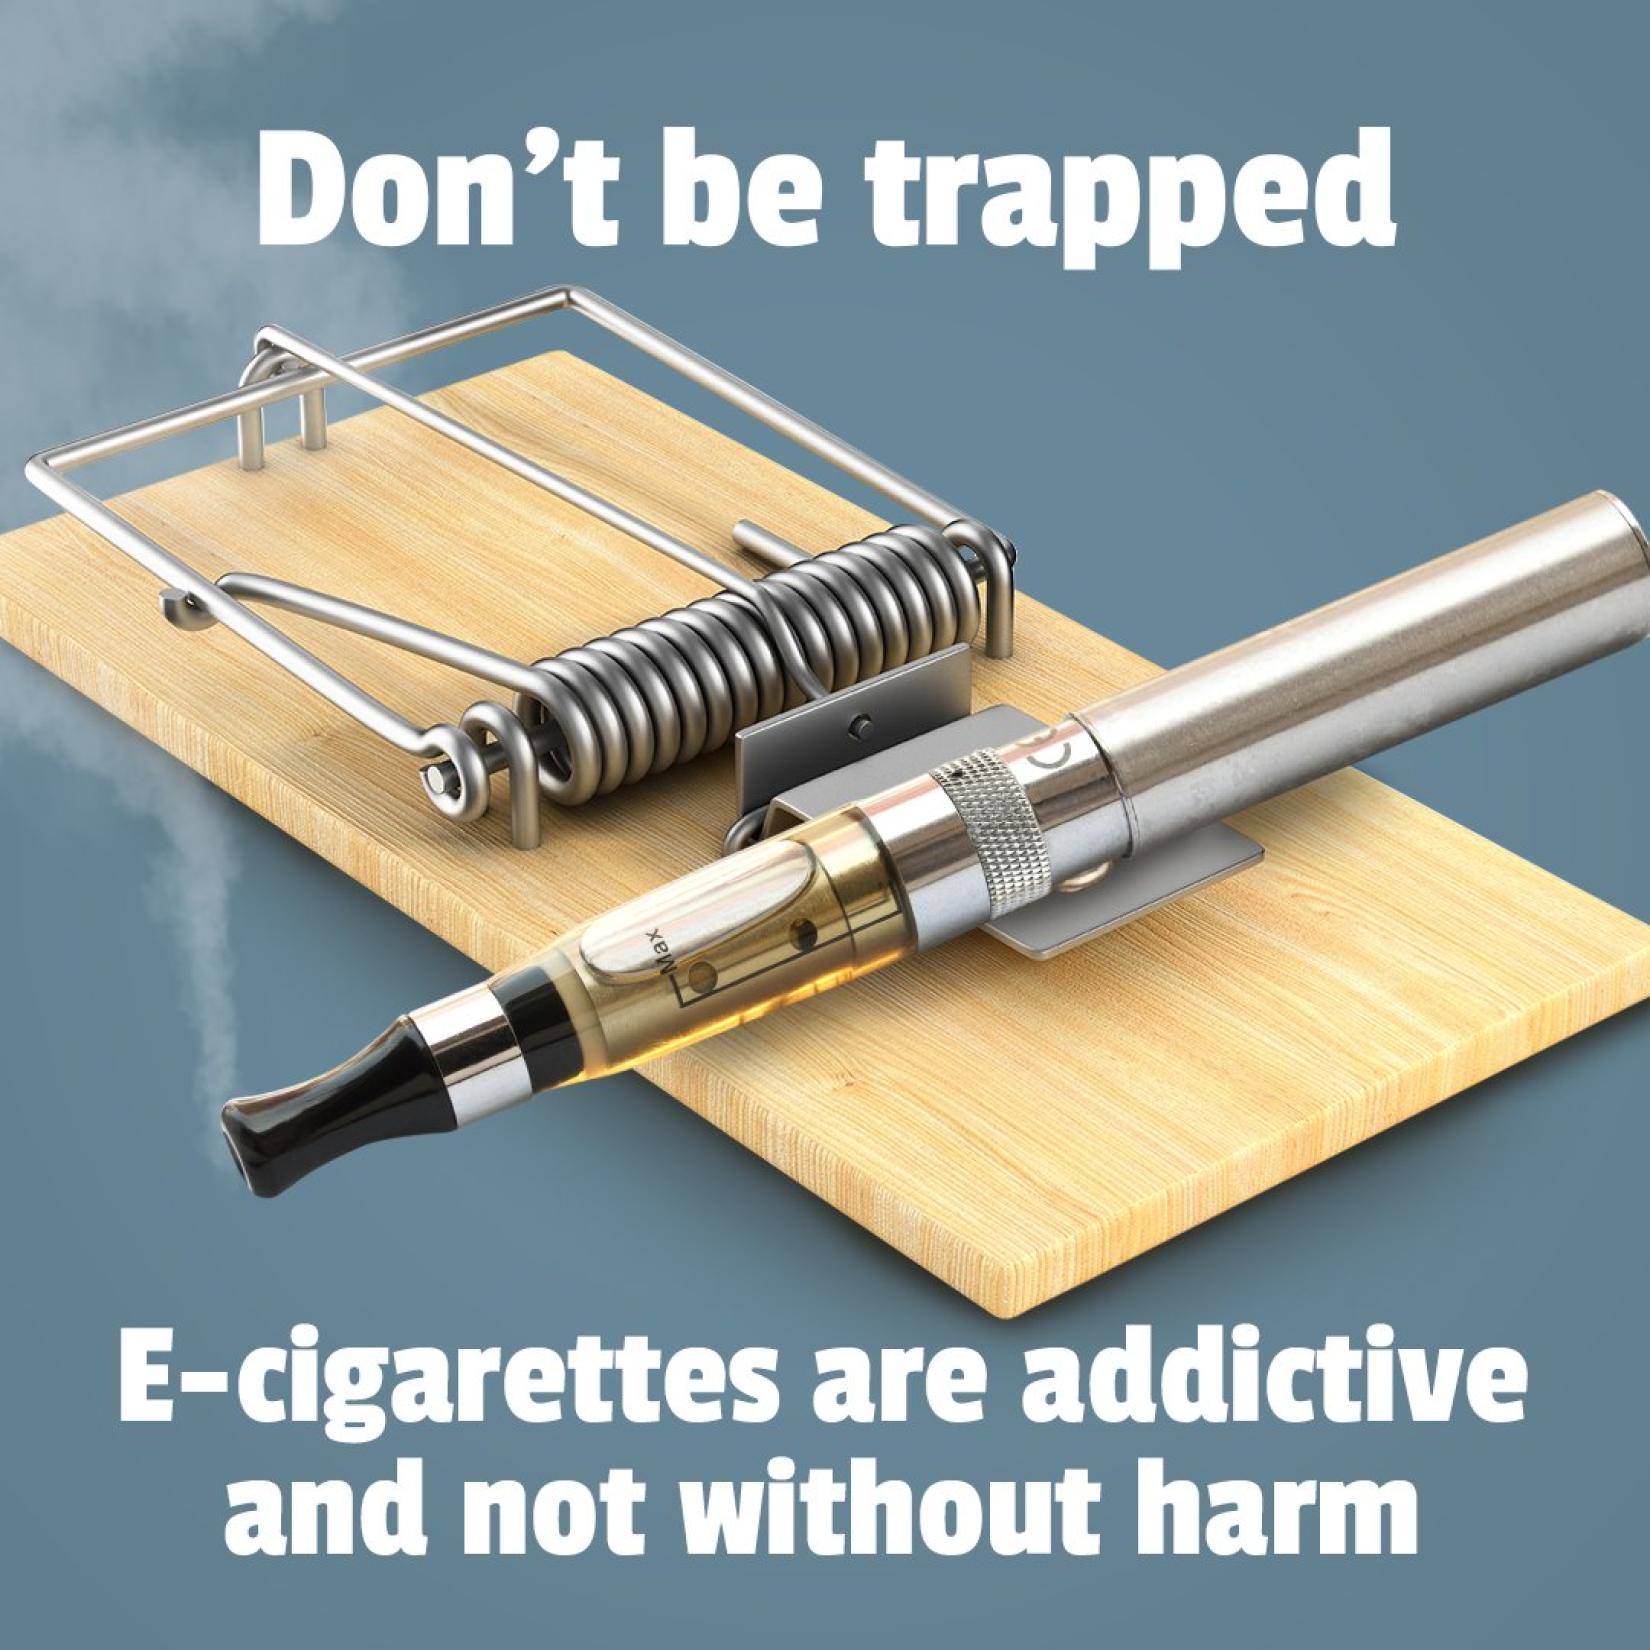 Health Risks of E-cigarettes, Smokeless Tobacco, and Waterpipes